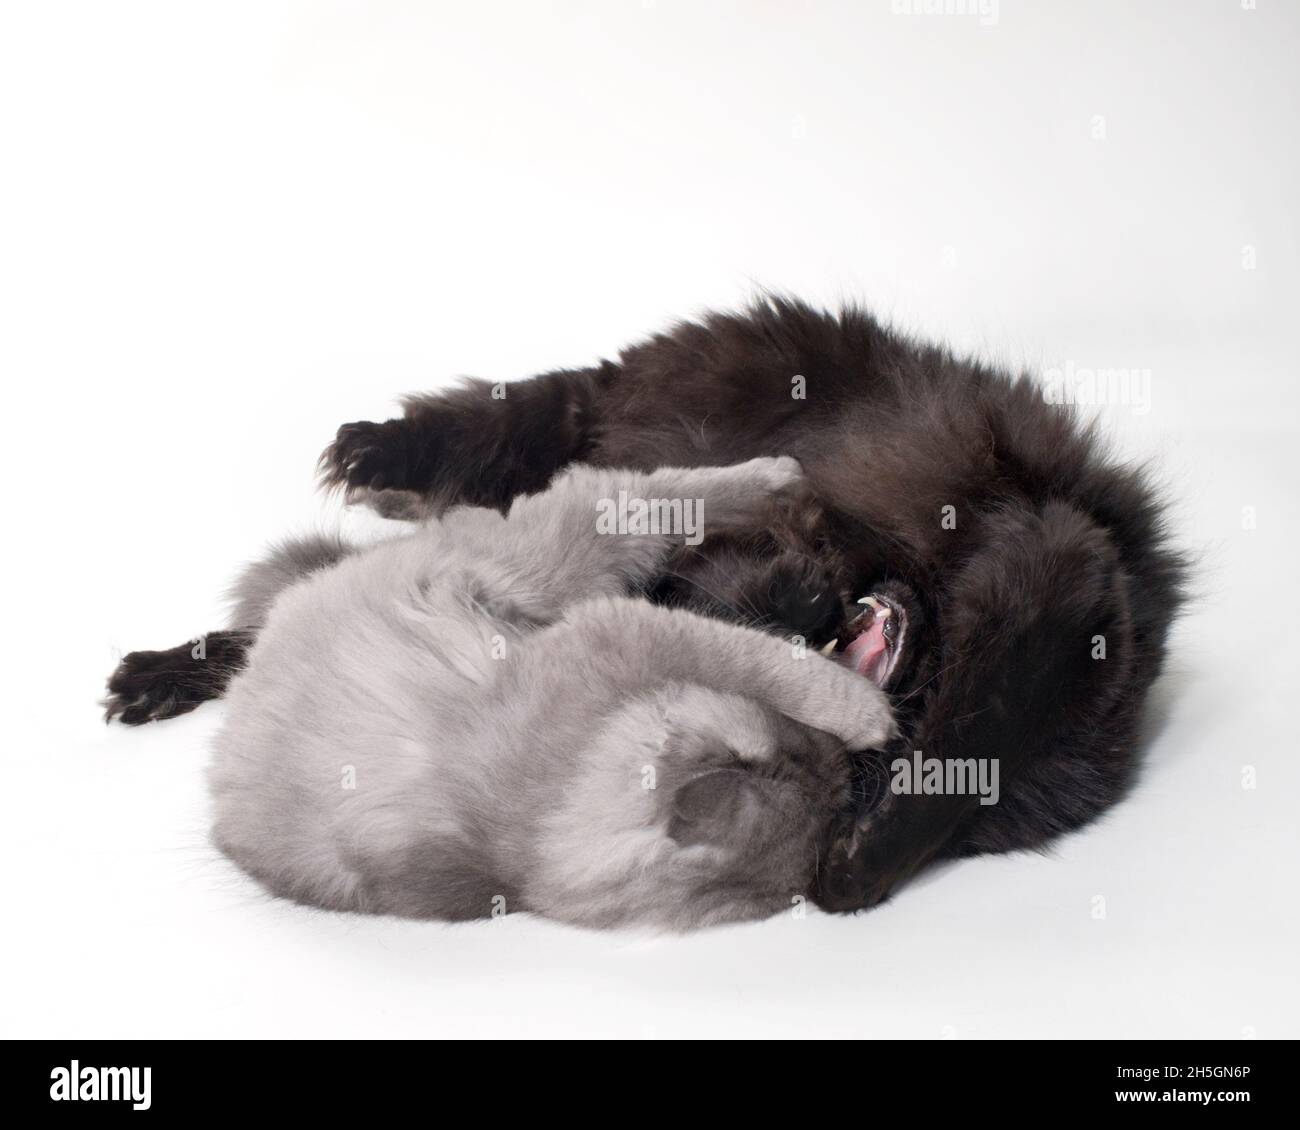 Two long haired grey cats playfully wrestling with each other. Stock Photo